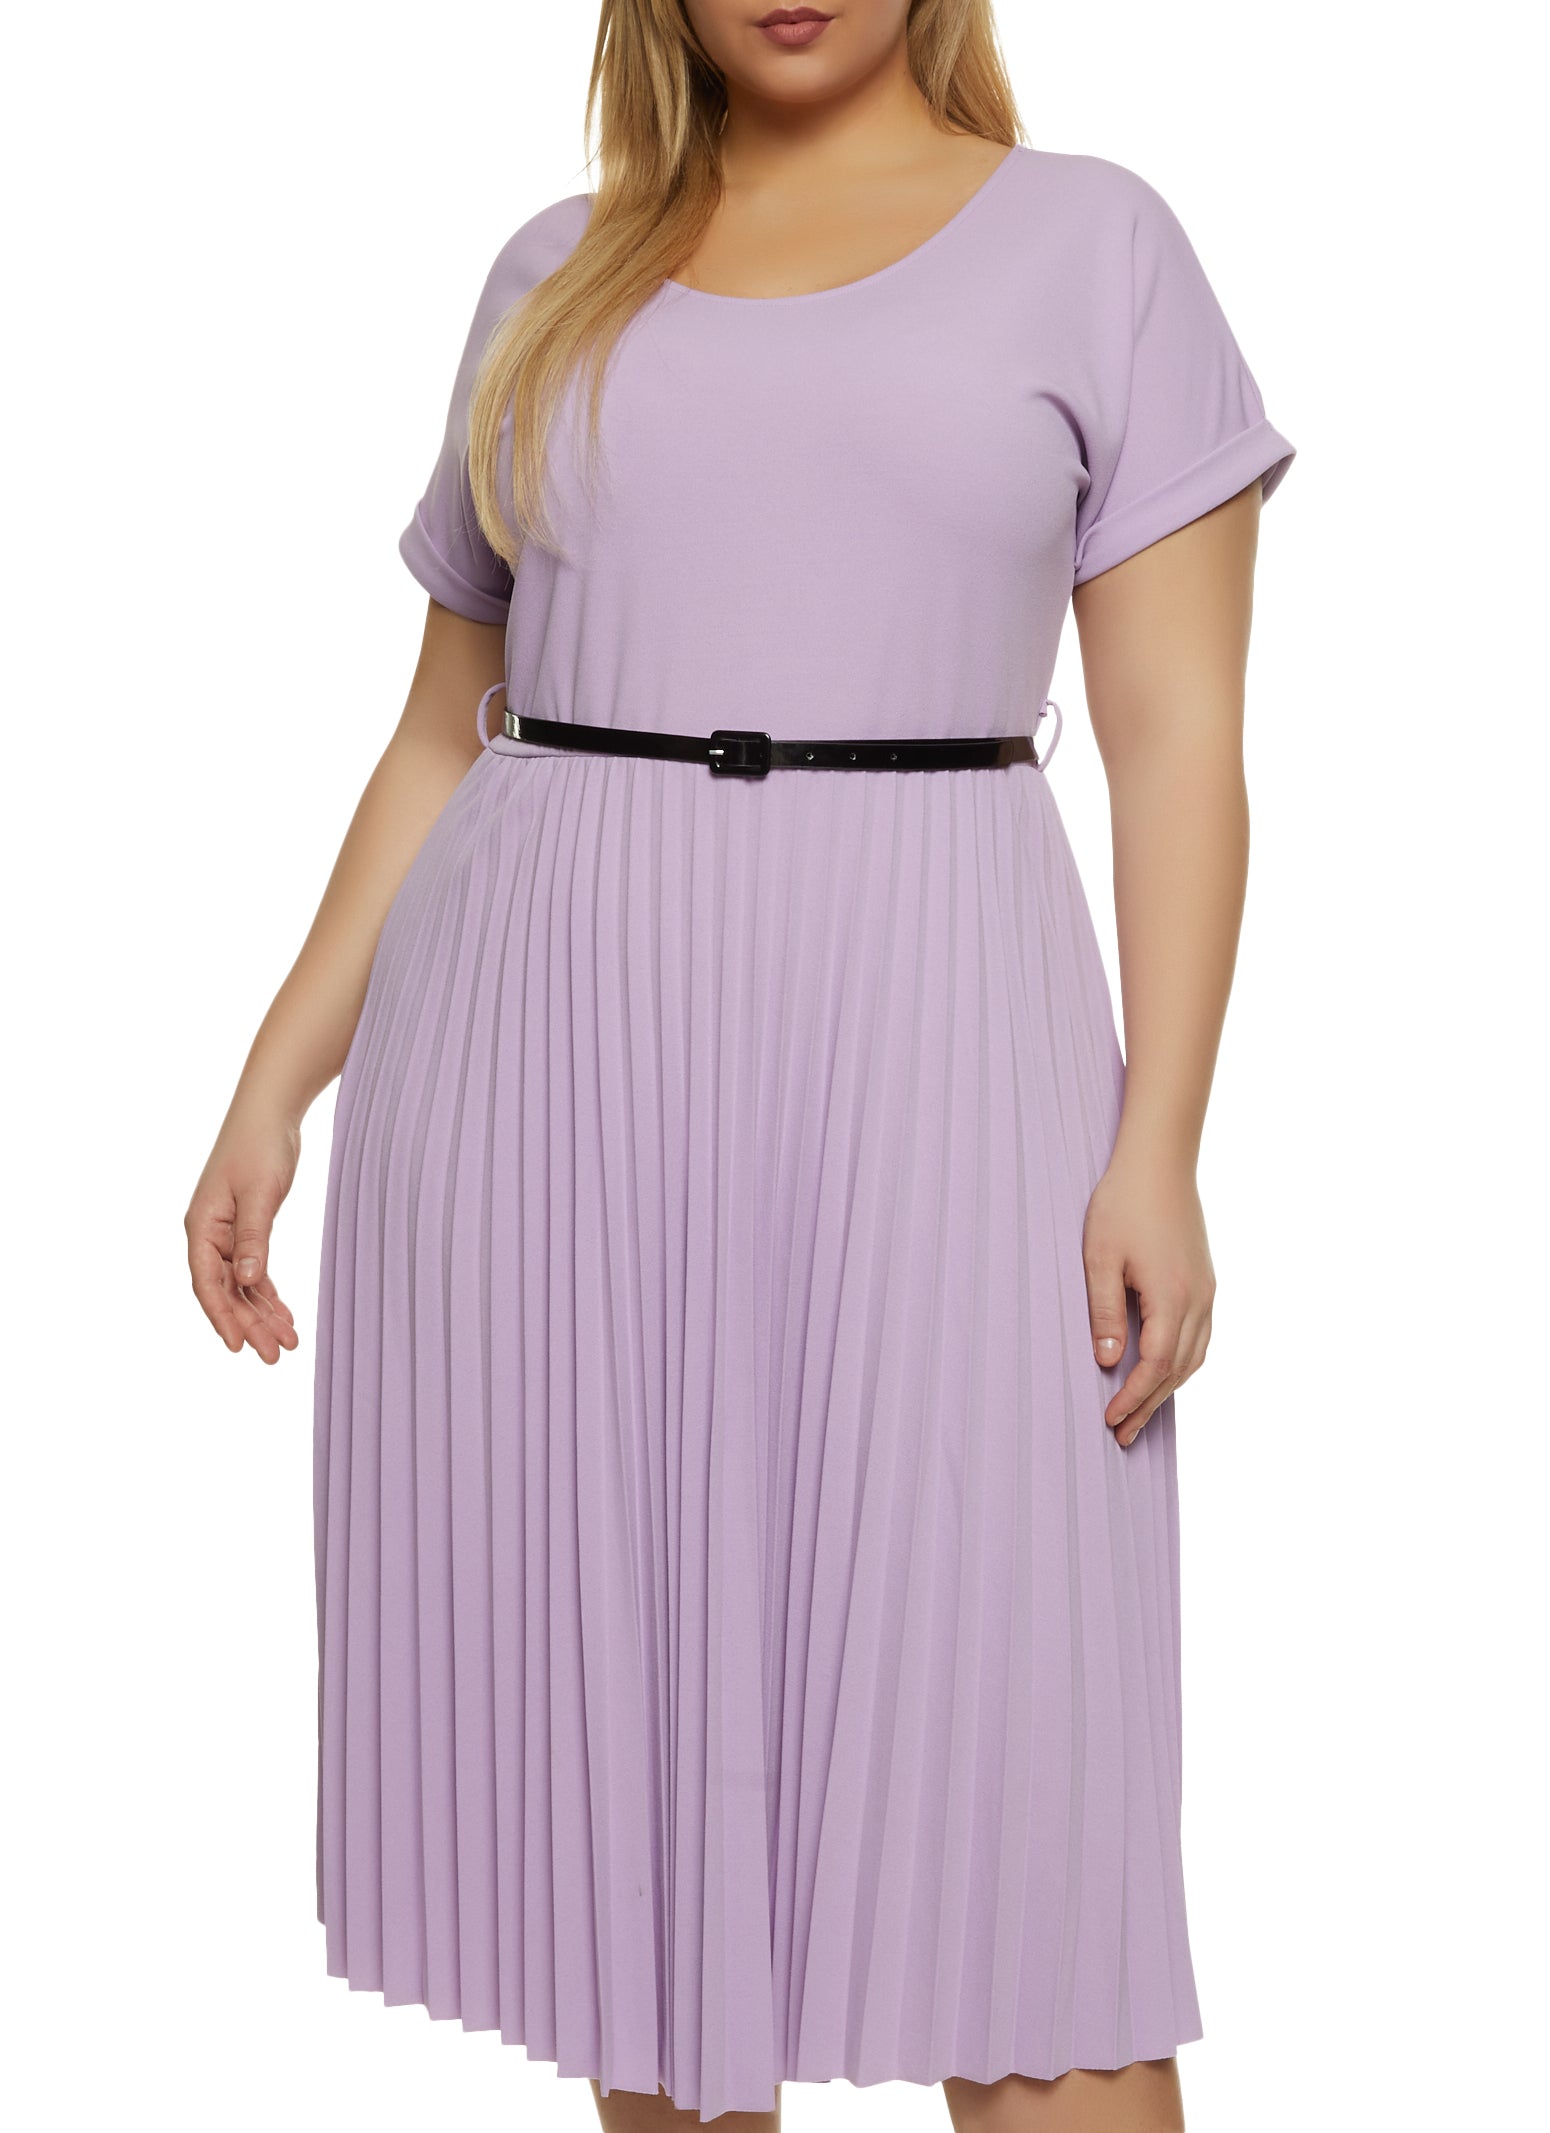 Plus Size Solid Pleated Skater Dress - Lavender